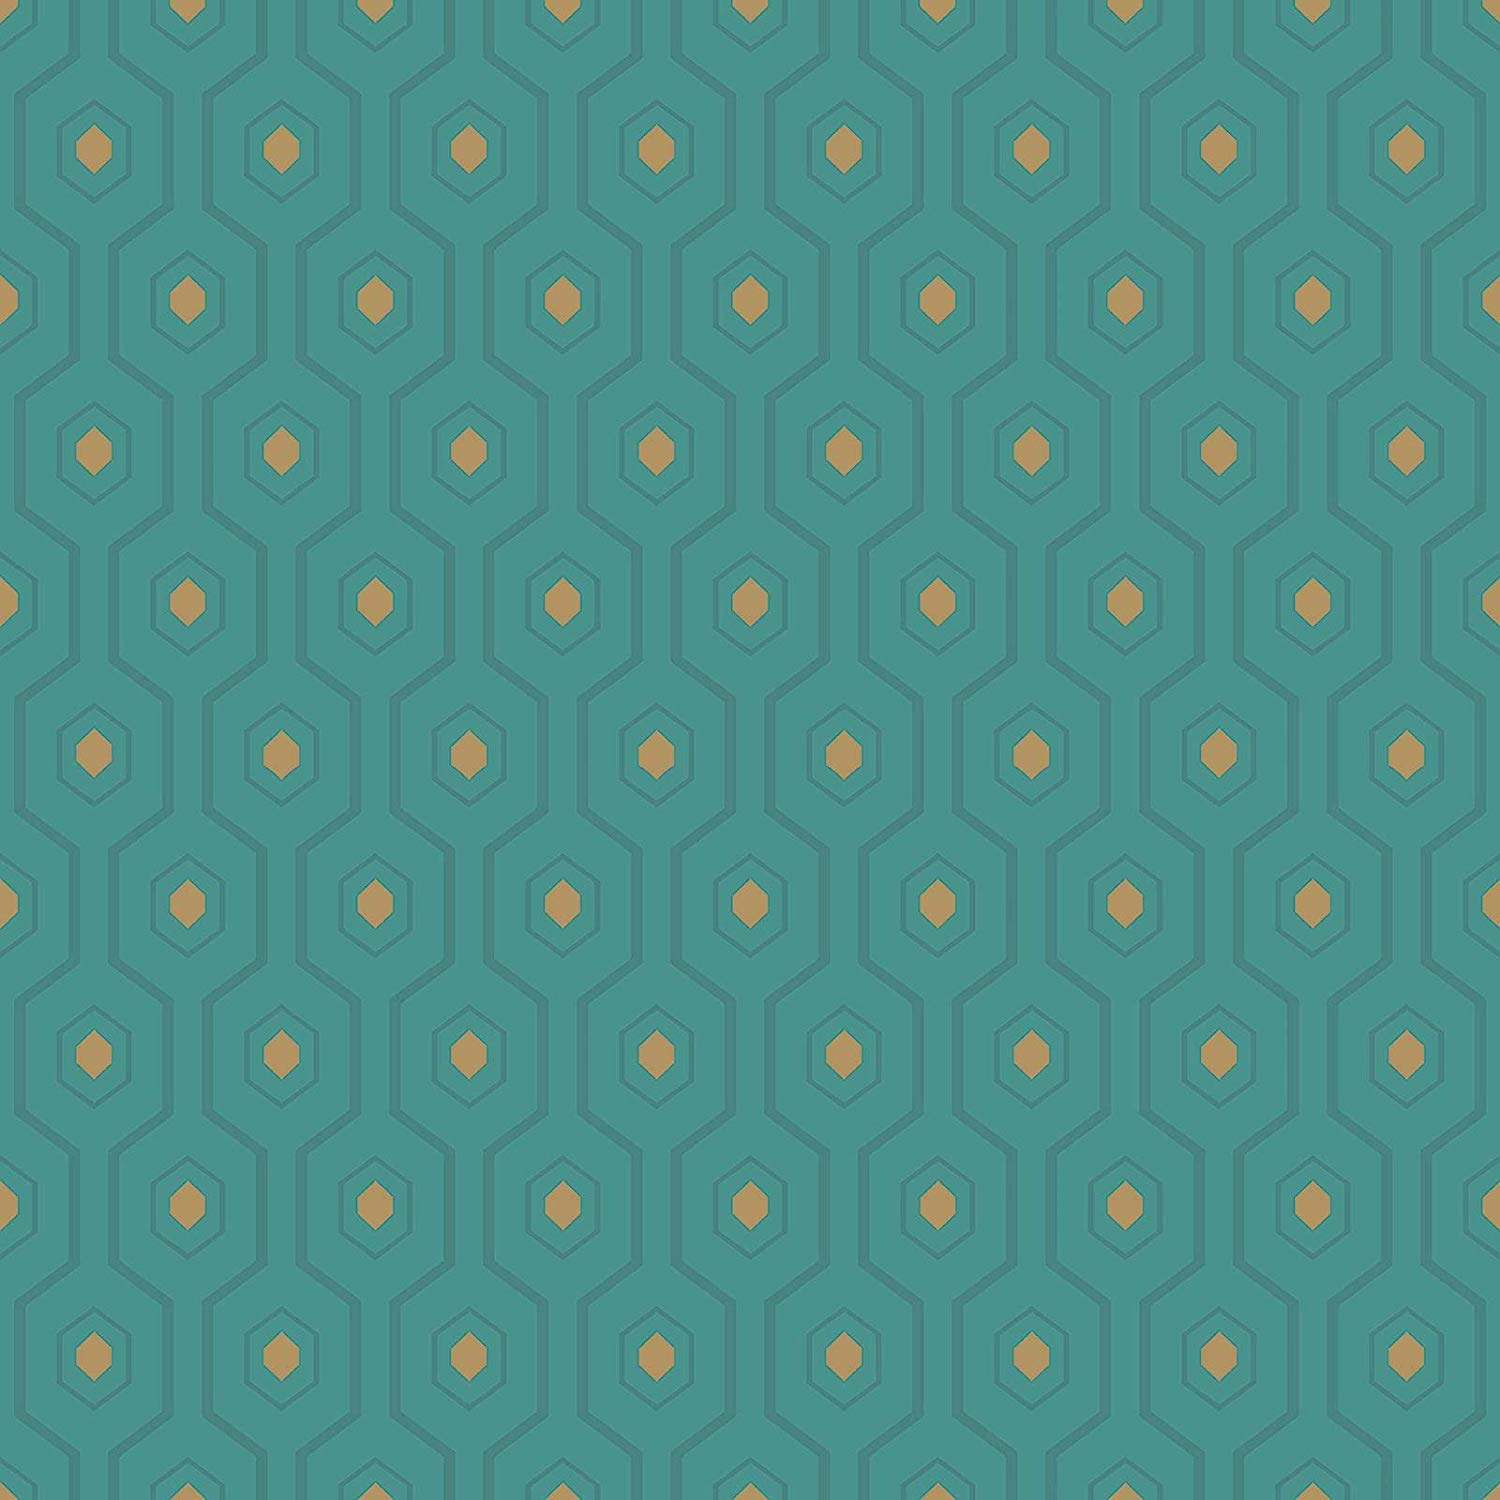 Gold And Teal - HD Wallpaper 